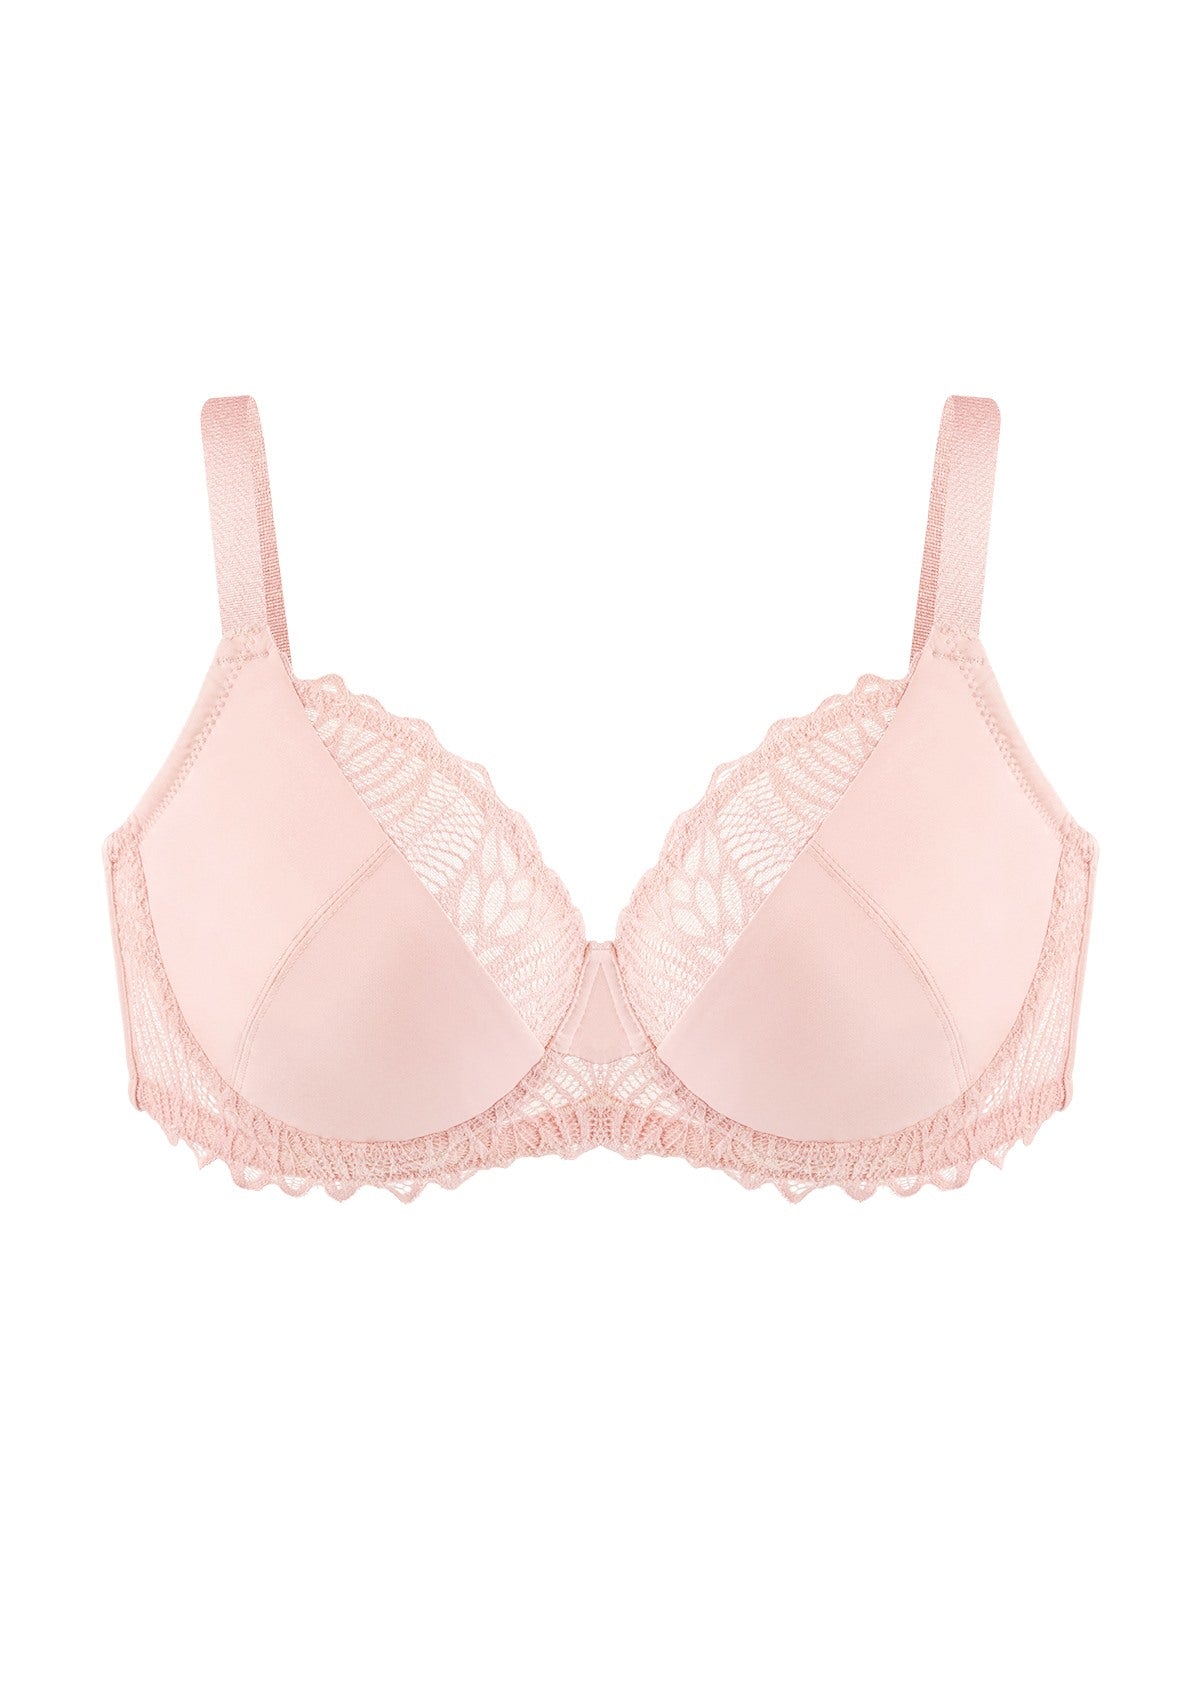 HSIA Pretty Secrets Lace-Trimmed Full Coverage Underwire Bra For Support - Light Pink / 40 / H